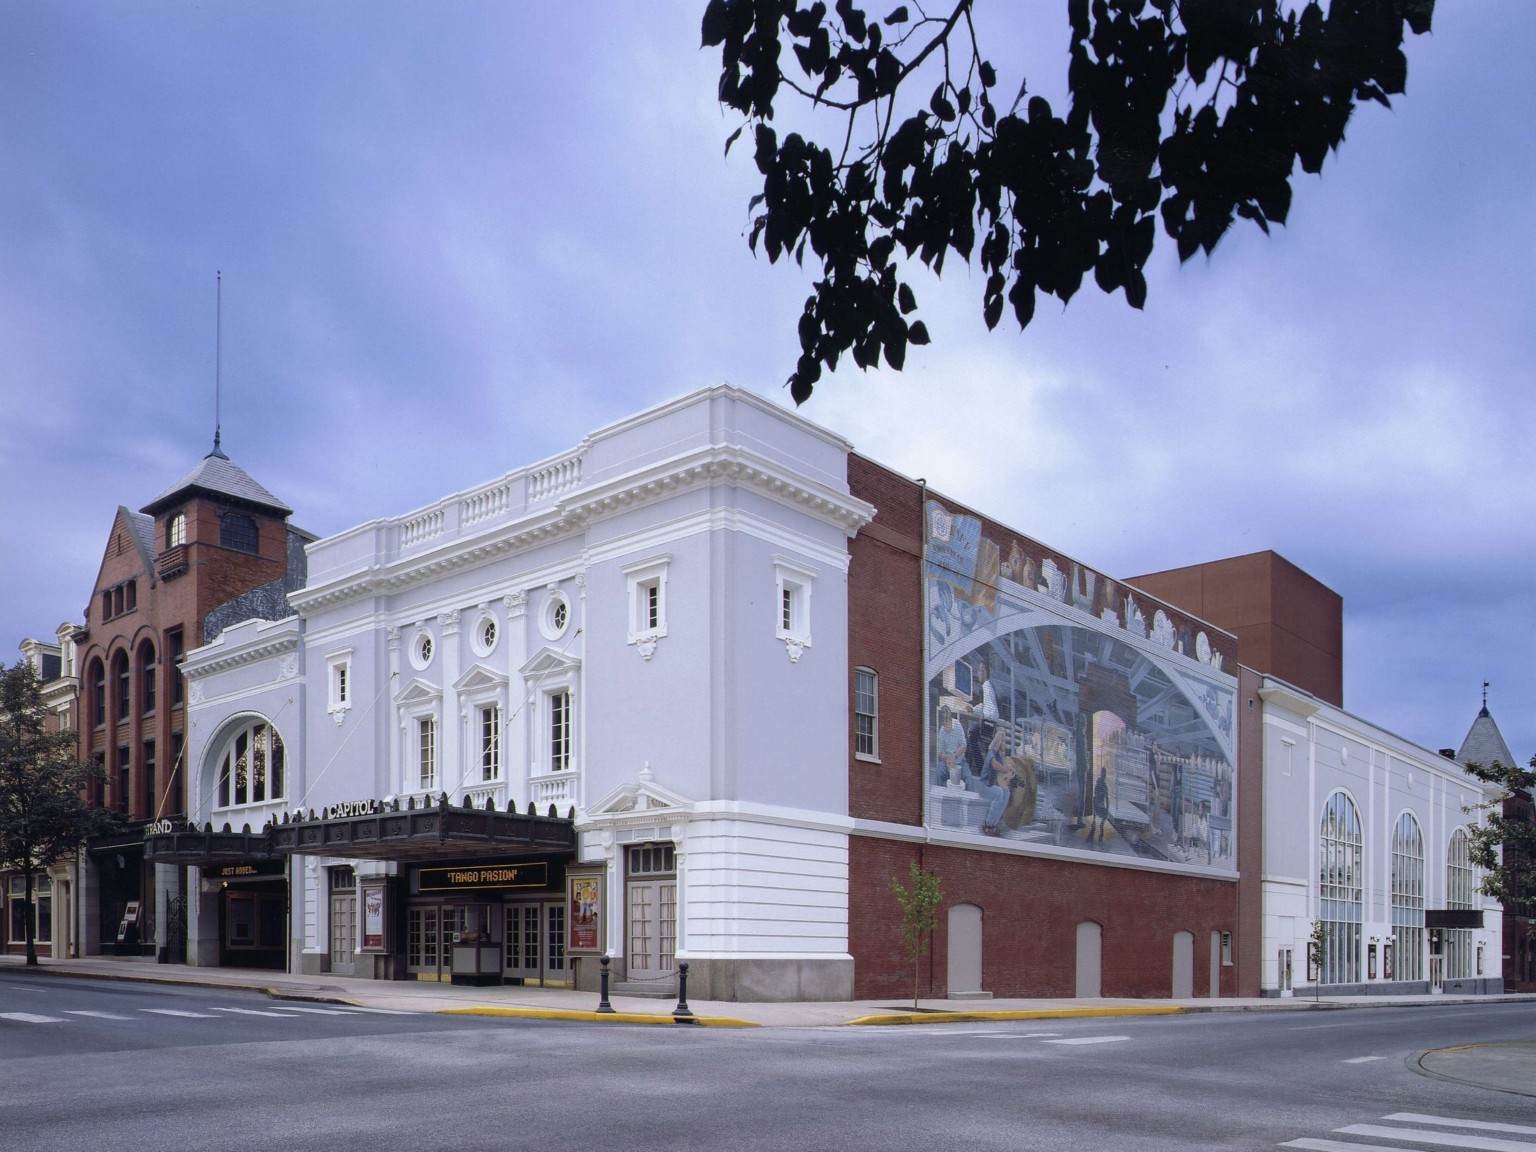 Exterior corner view of Capitol Theater with white front facade with moulding and black awning, mural on right brick wall